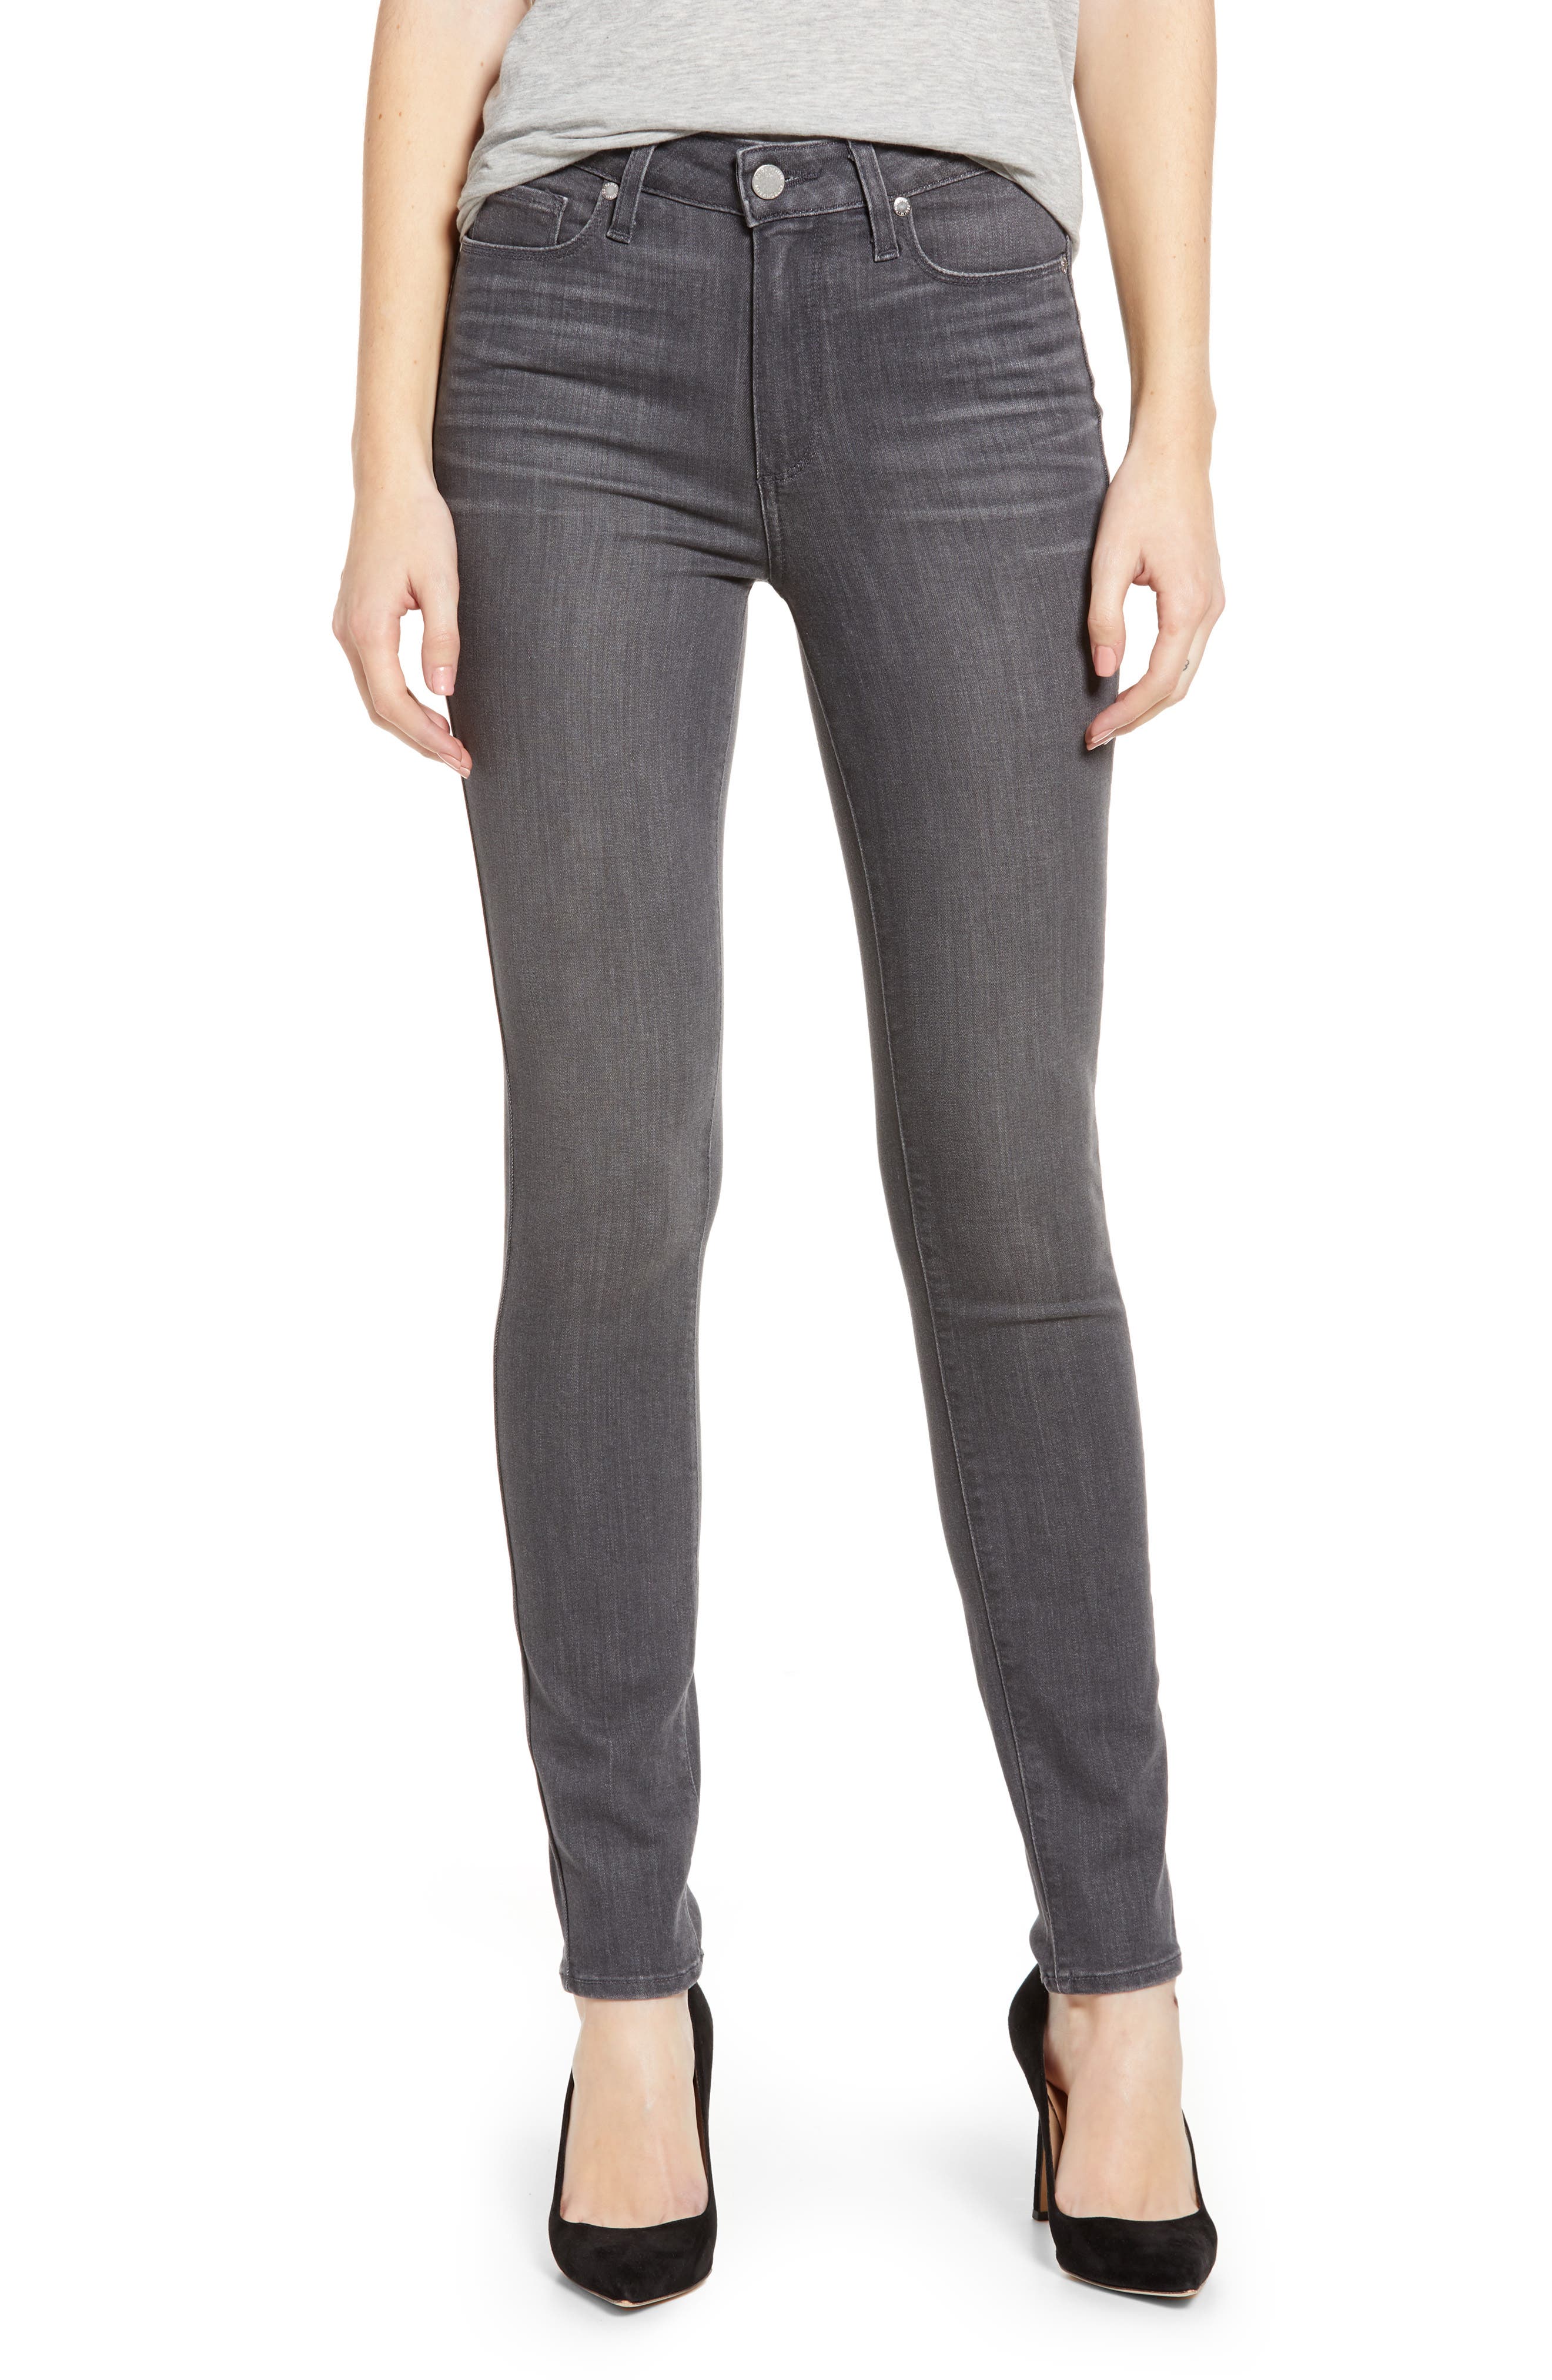 grey distressed jeans womens